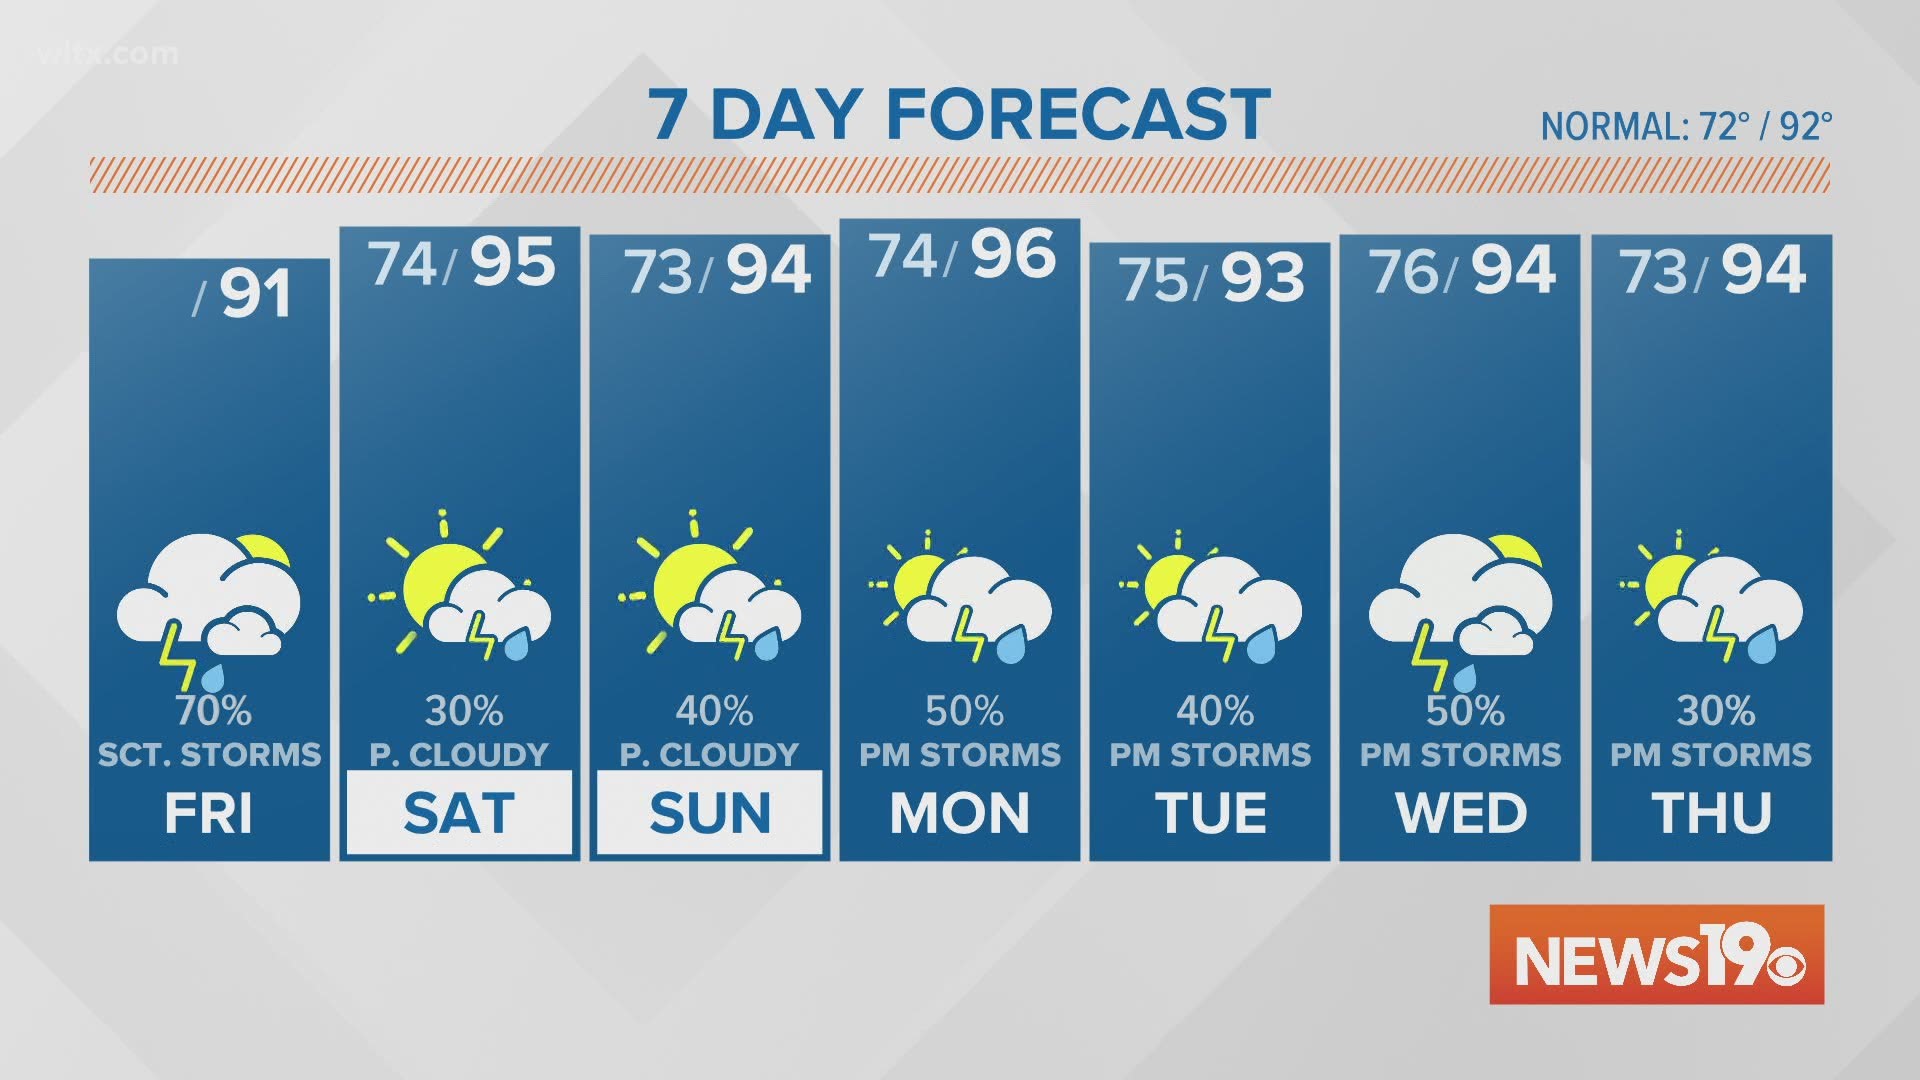 Rain expected in the evening on Friday, pop up afternoon storms for the weekend.